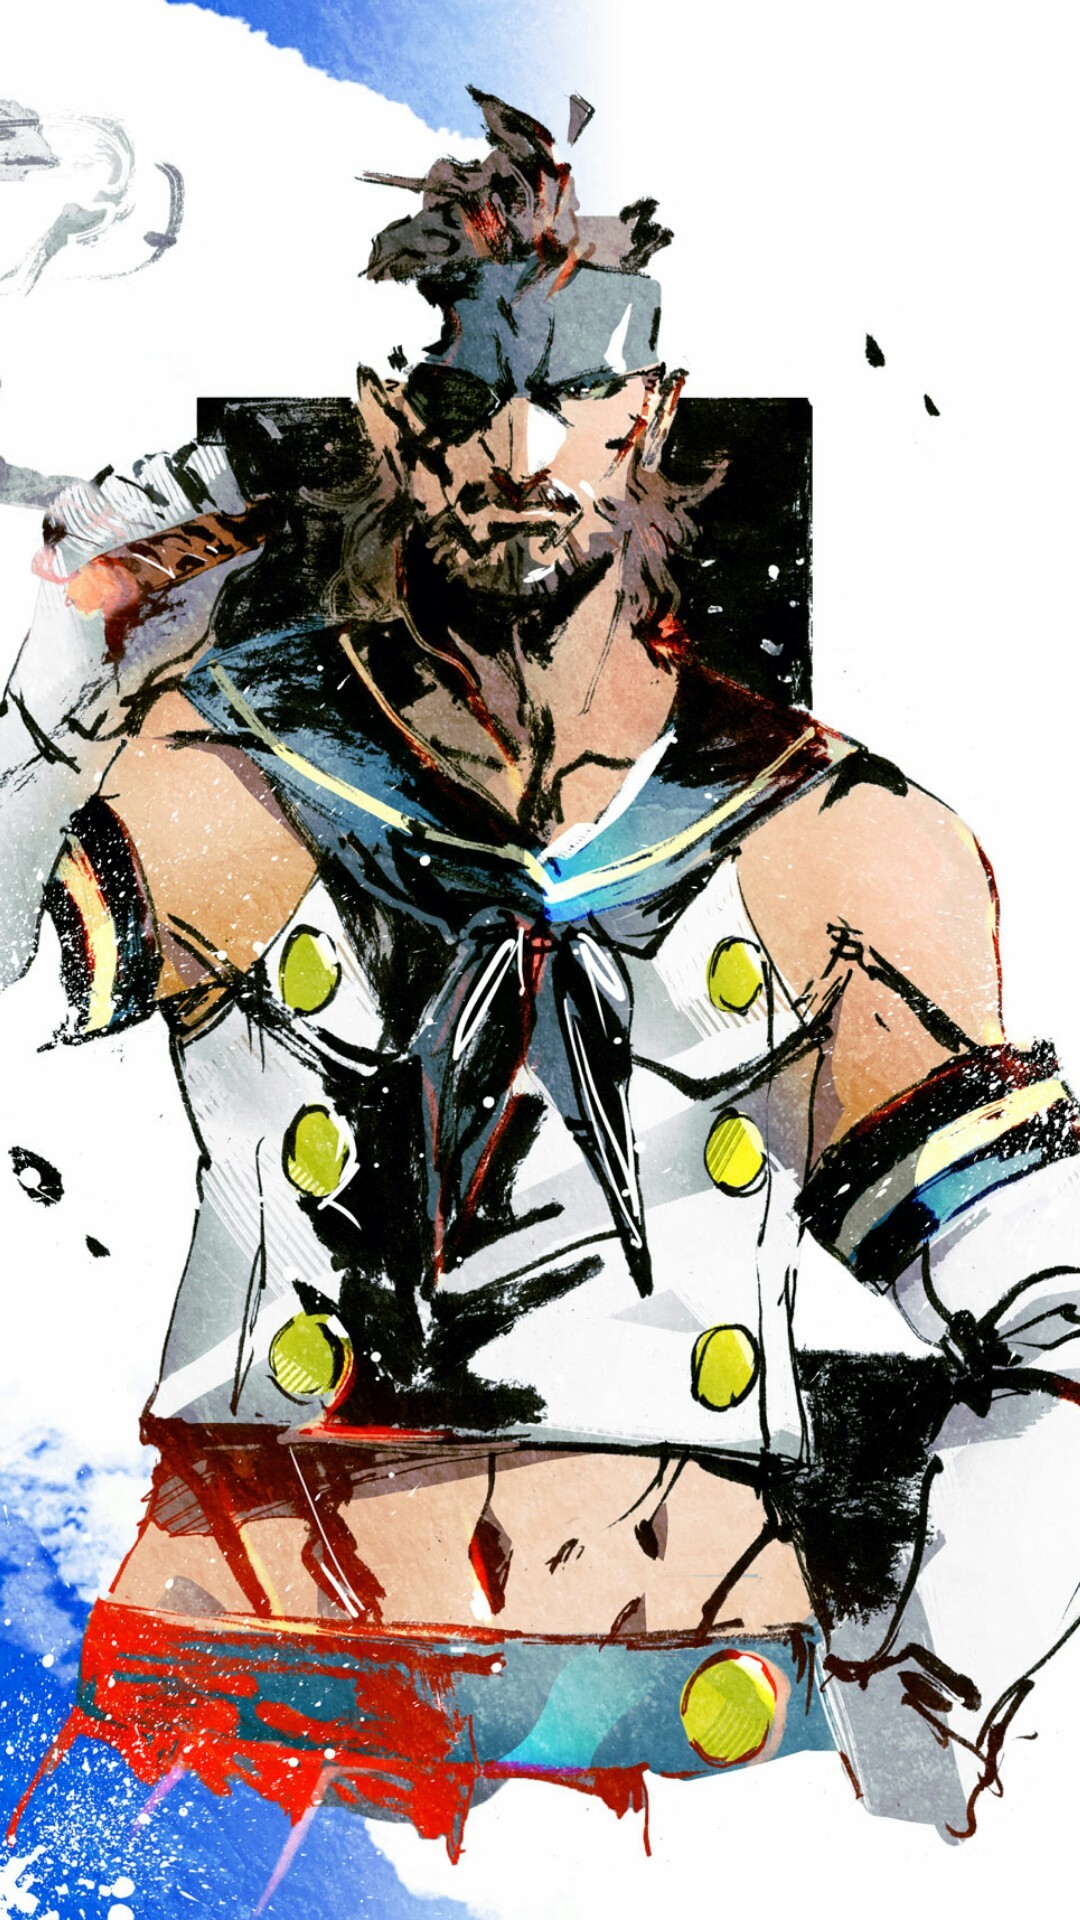 Big Boss in a sailor outfit